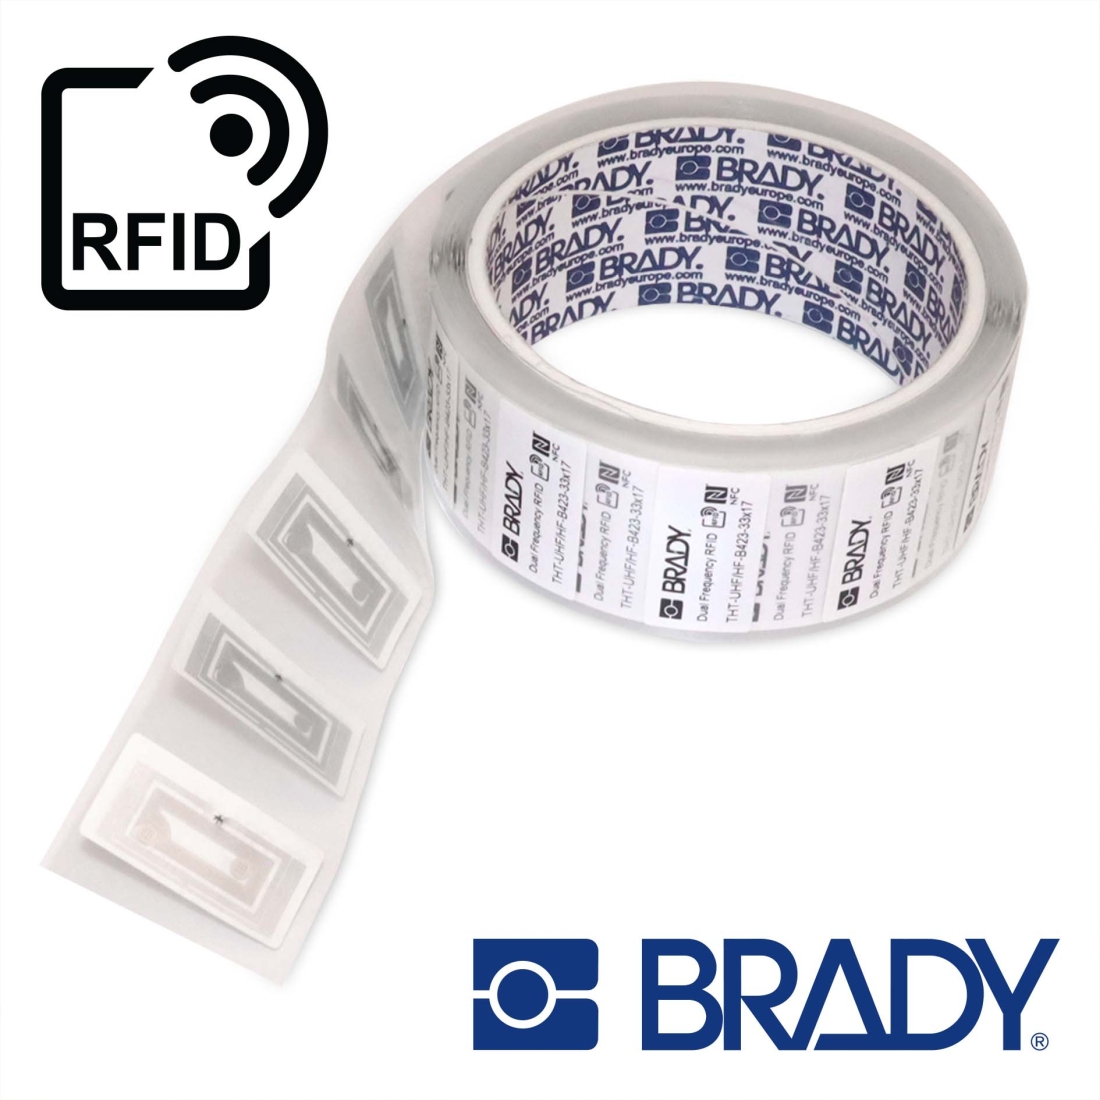 Dual Frequency RFID square